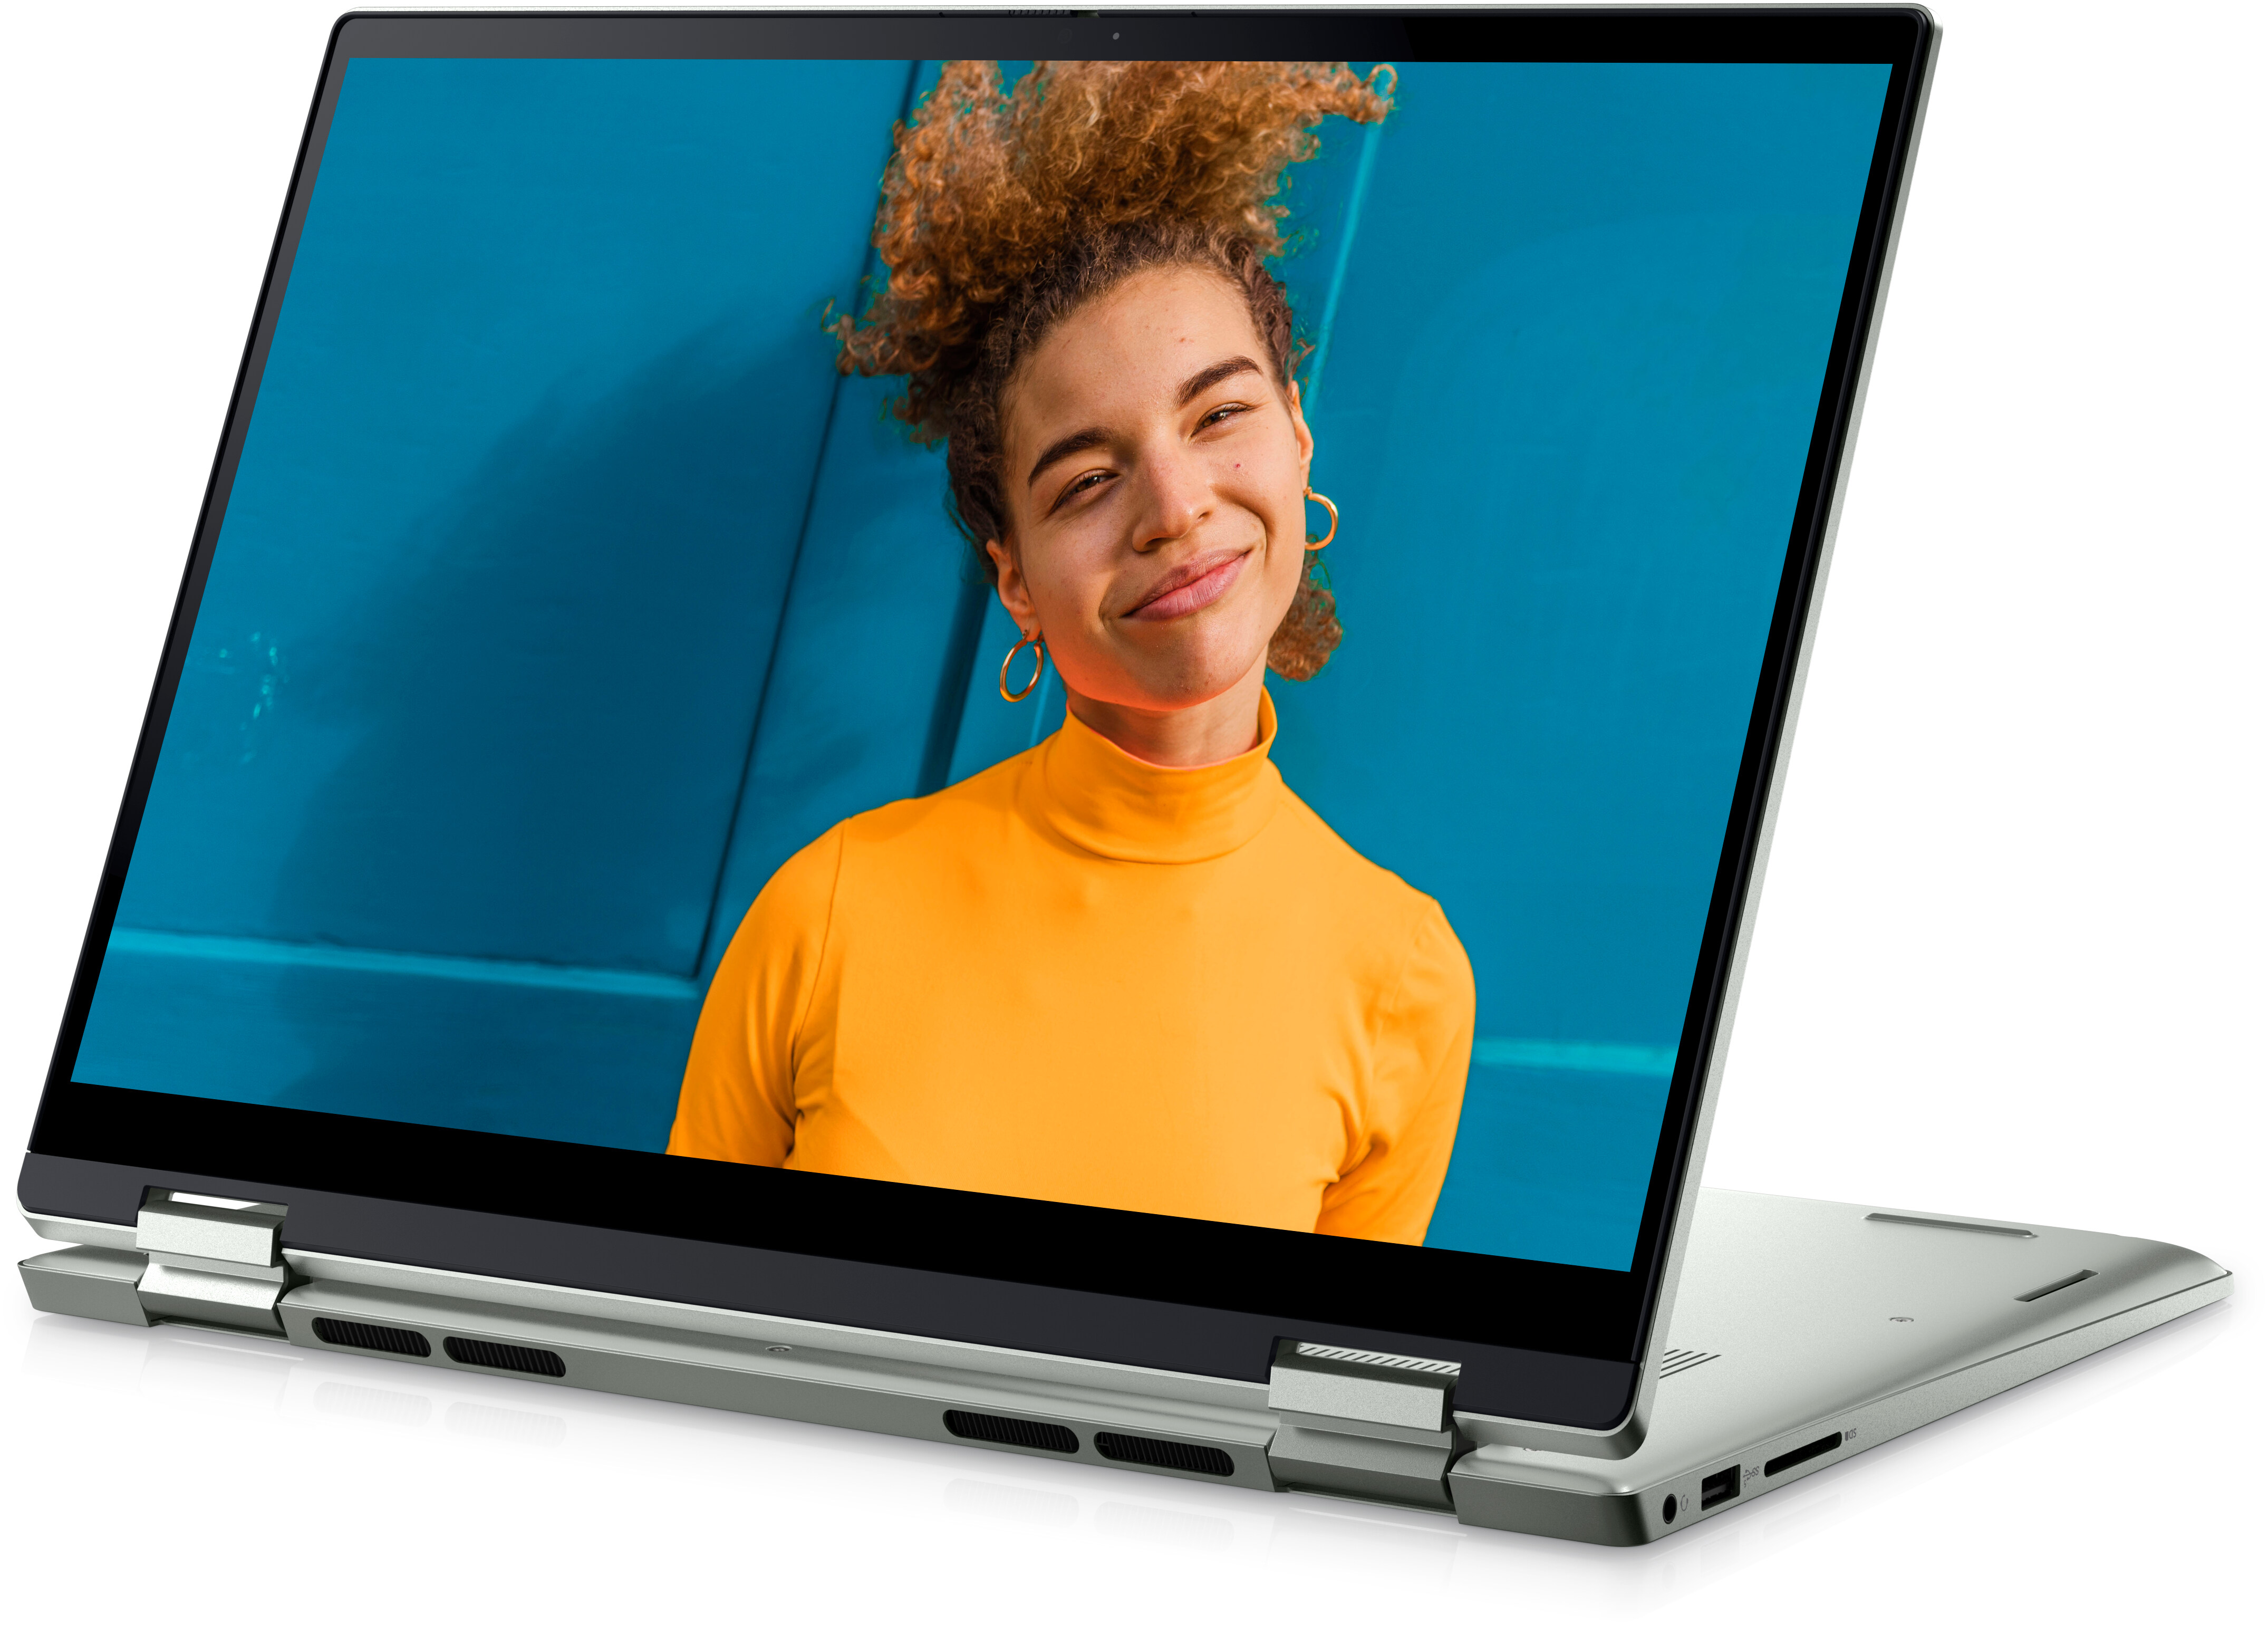 Inspiron 14-inch 2-in-1 Laptop with AMD Mobile Processor | Dell Canada